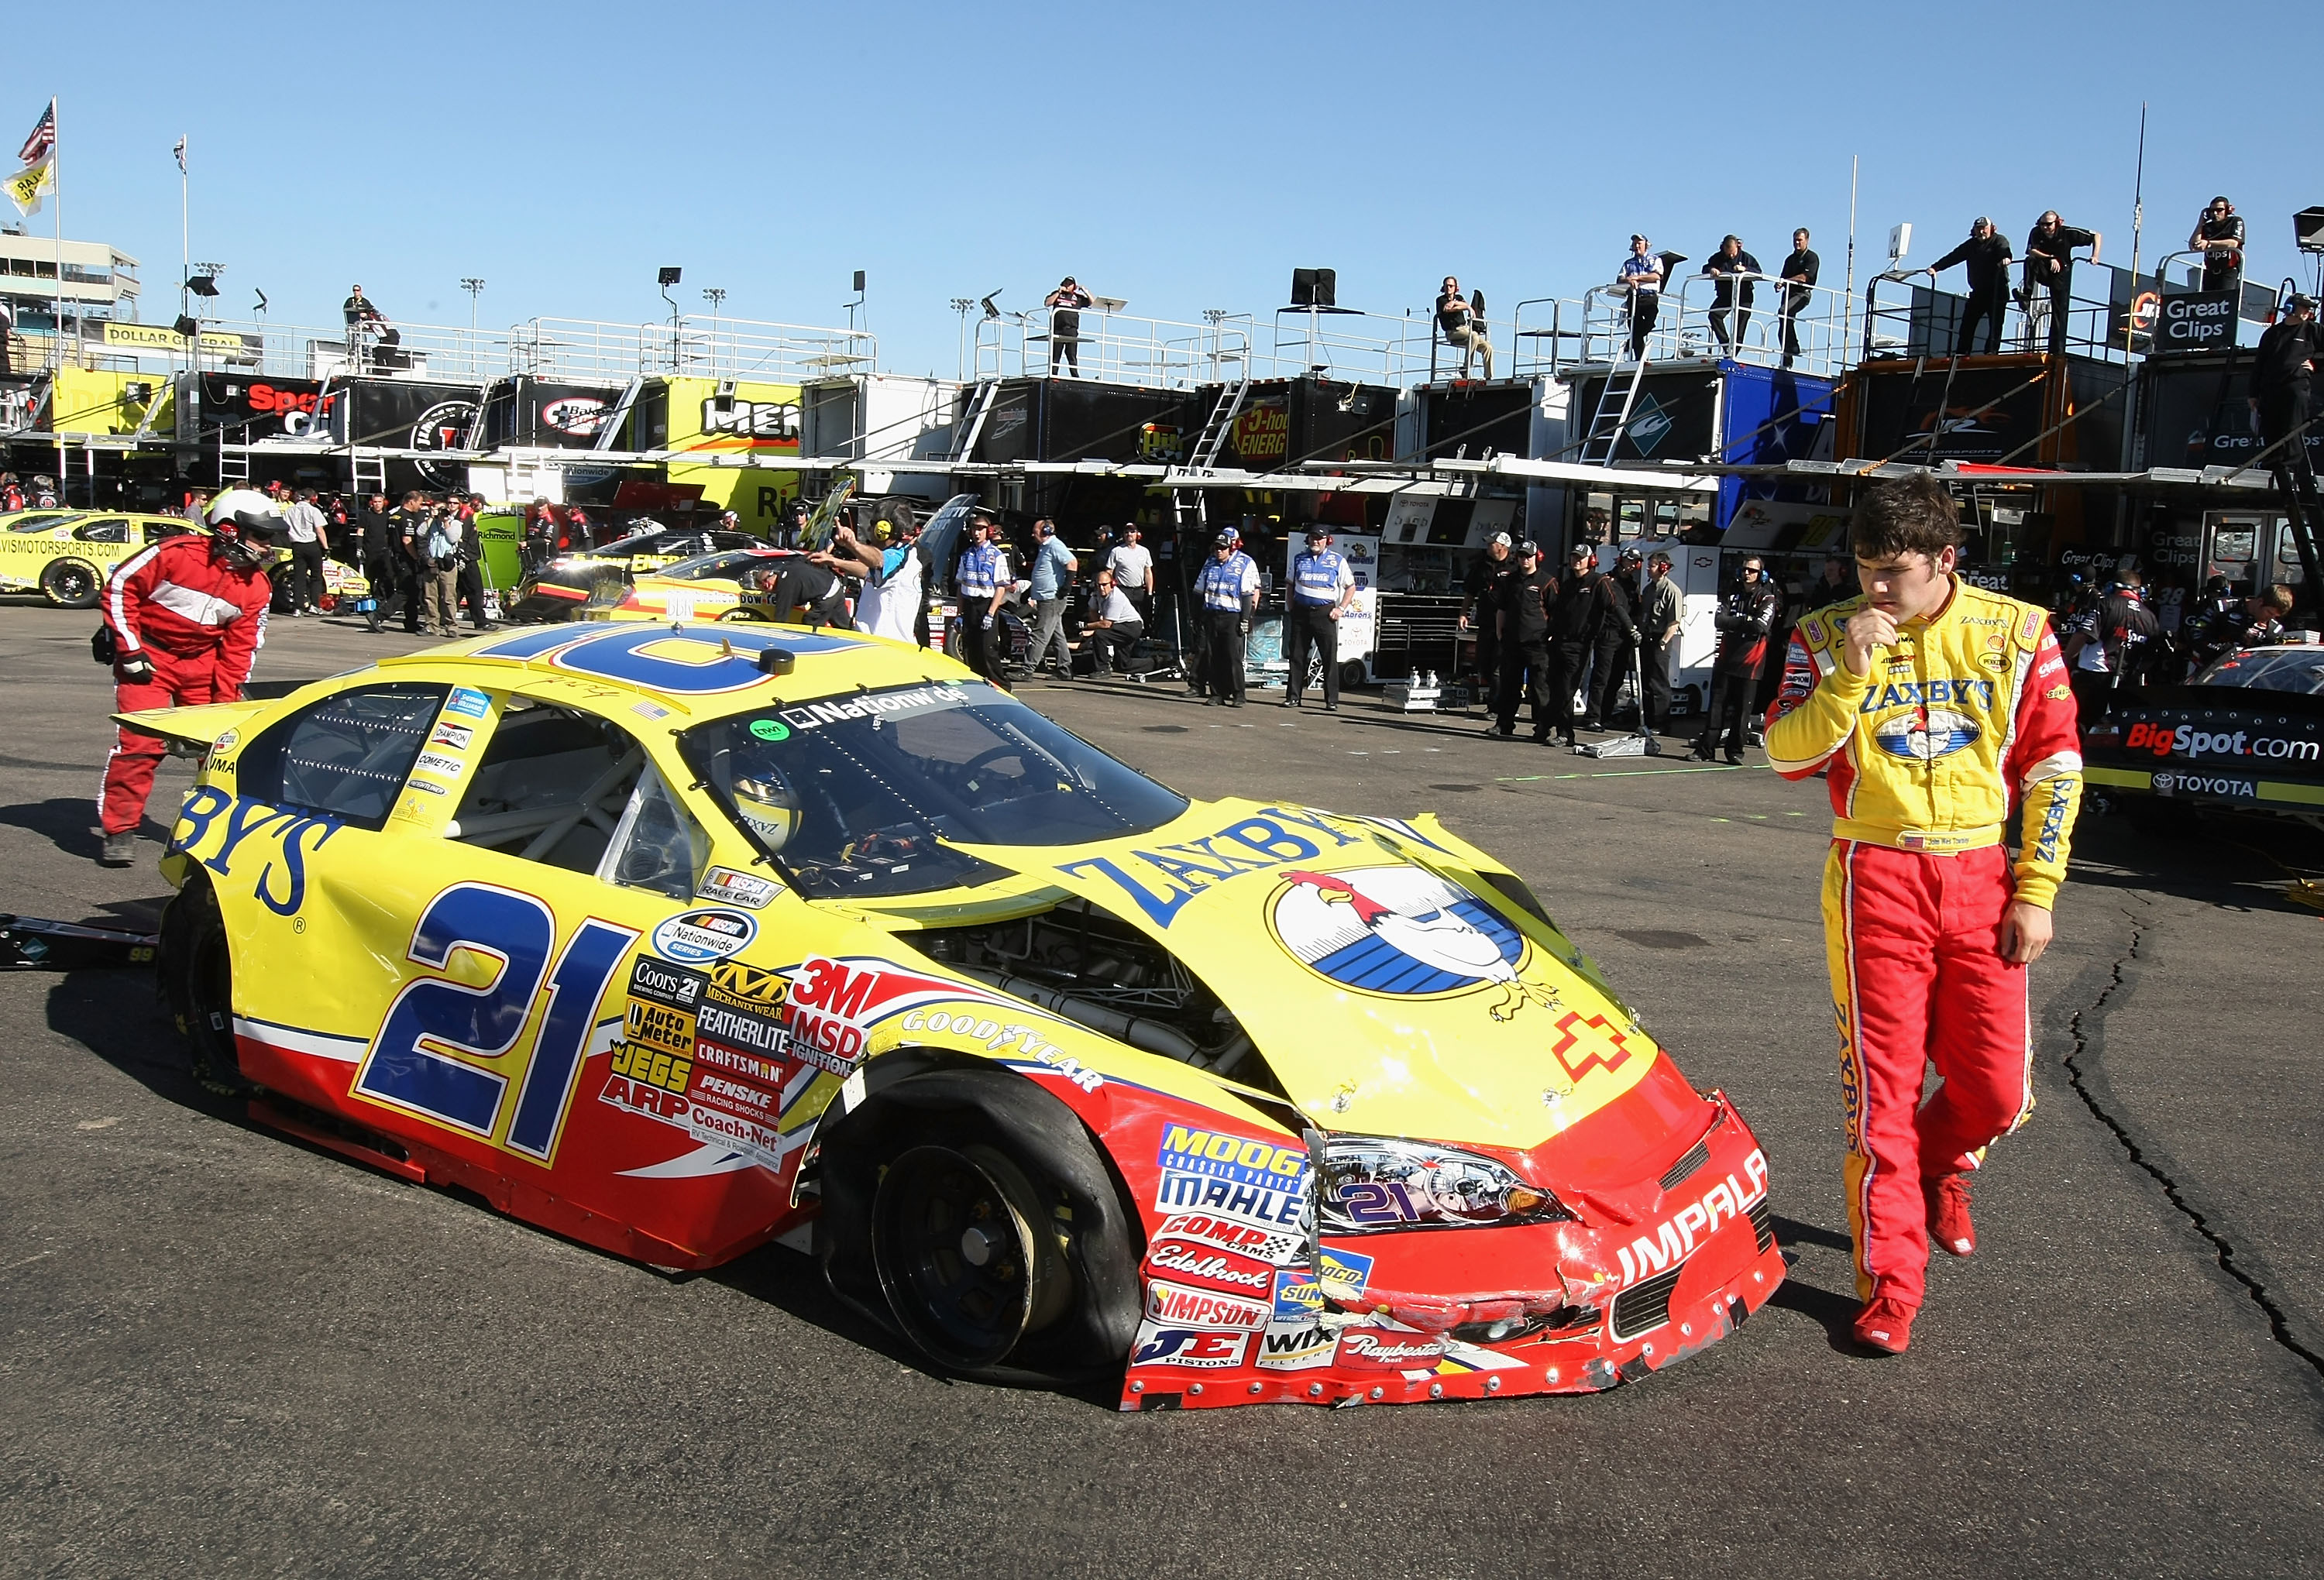 PHOENIX - APRIL 09:  John Wes Townley, driver of the #21 Zaxby's Chevrolet, looks at his car after a crash during practice for the NASCAR Nationwide Series Bashas' Supermarkets 200 at Phoenix International Raceway on April 9, 2010 in Phoenix, Arizona.  (P